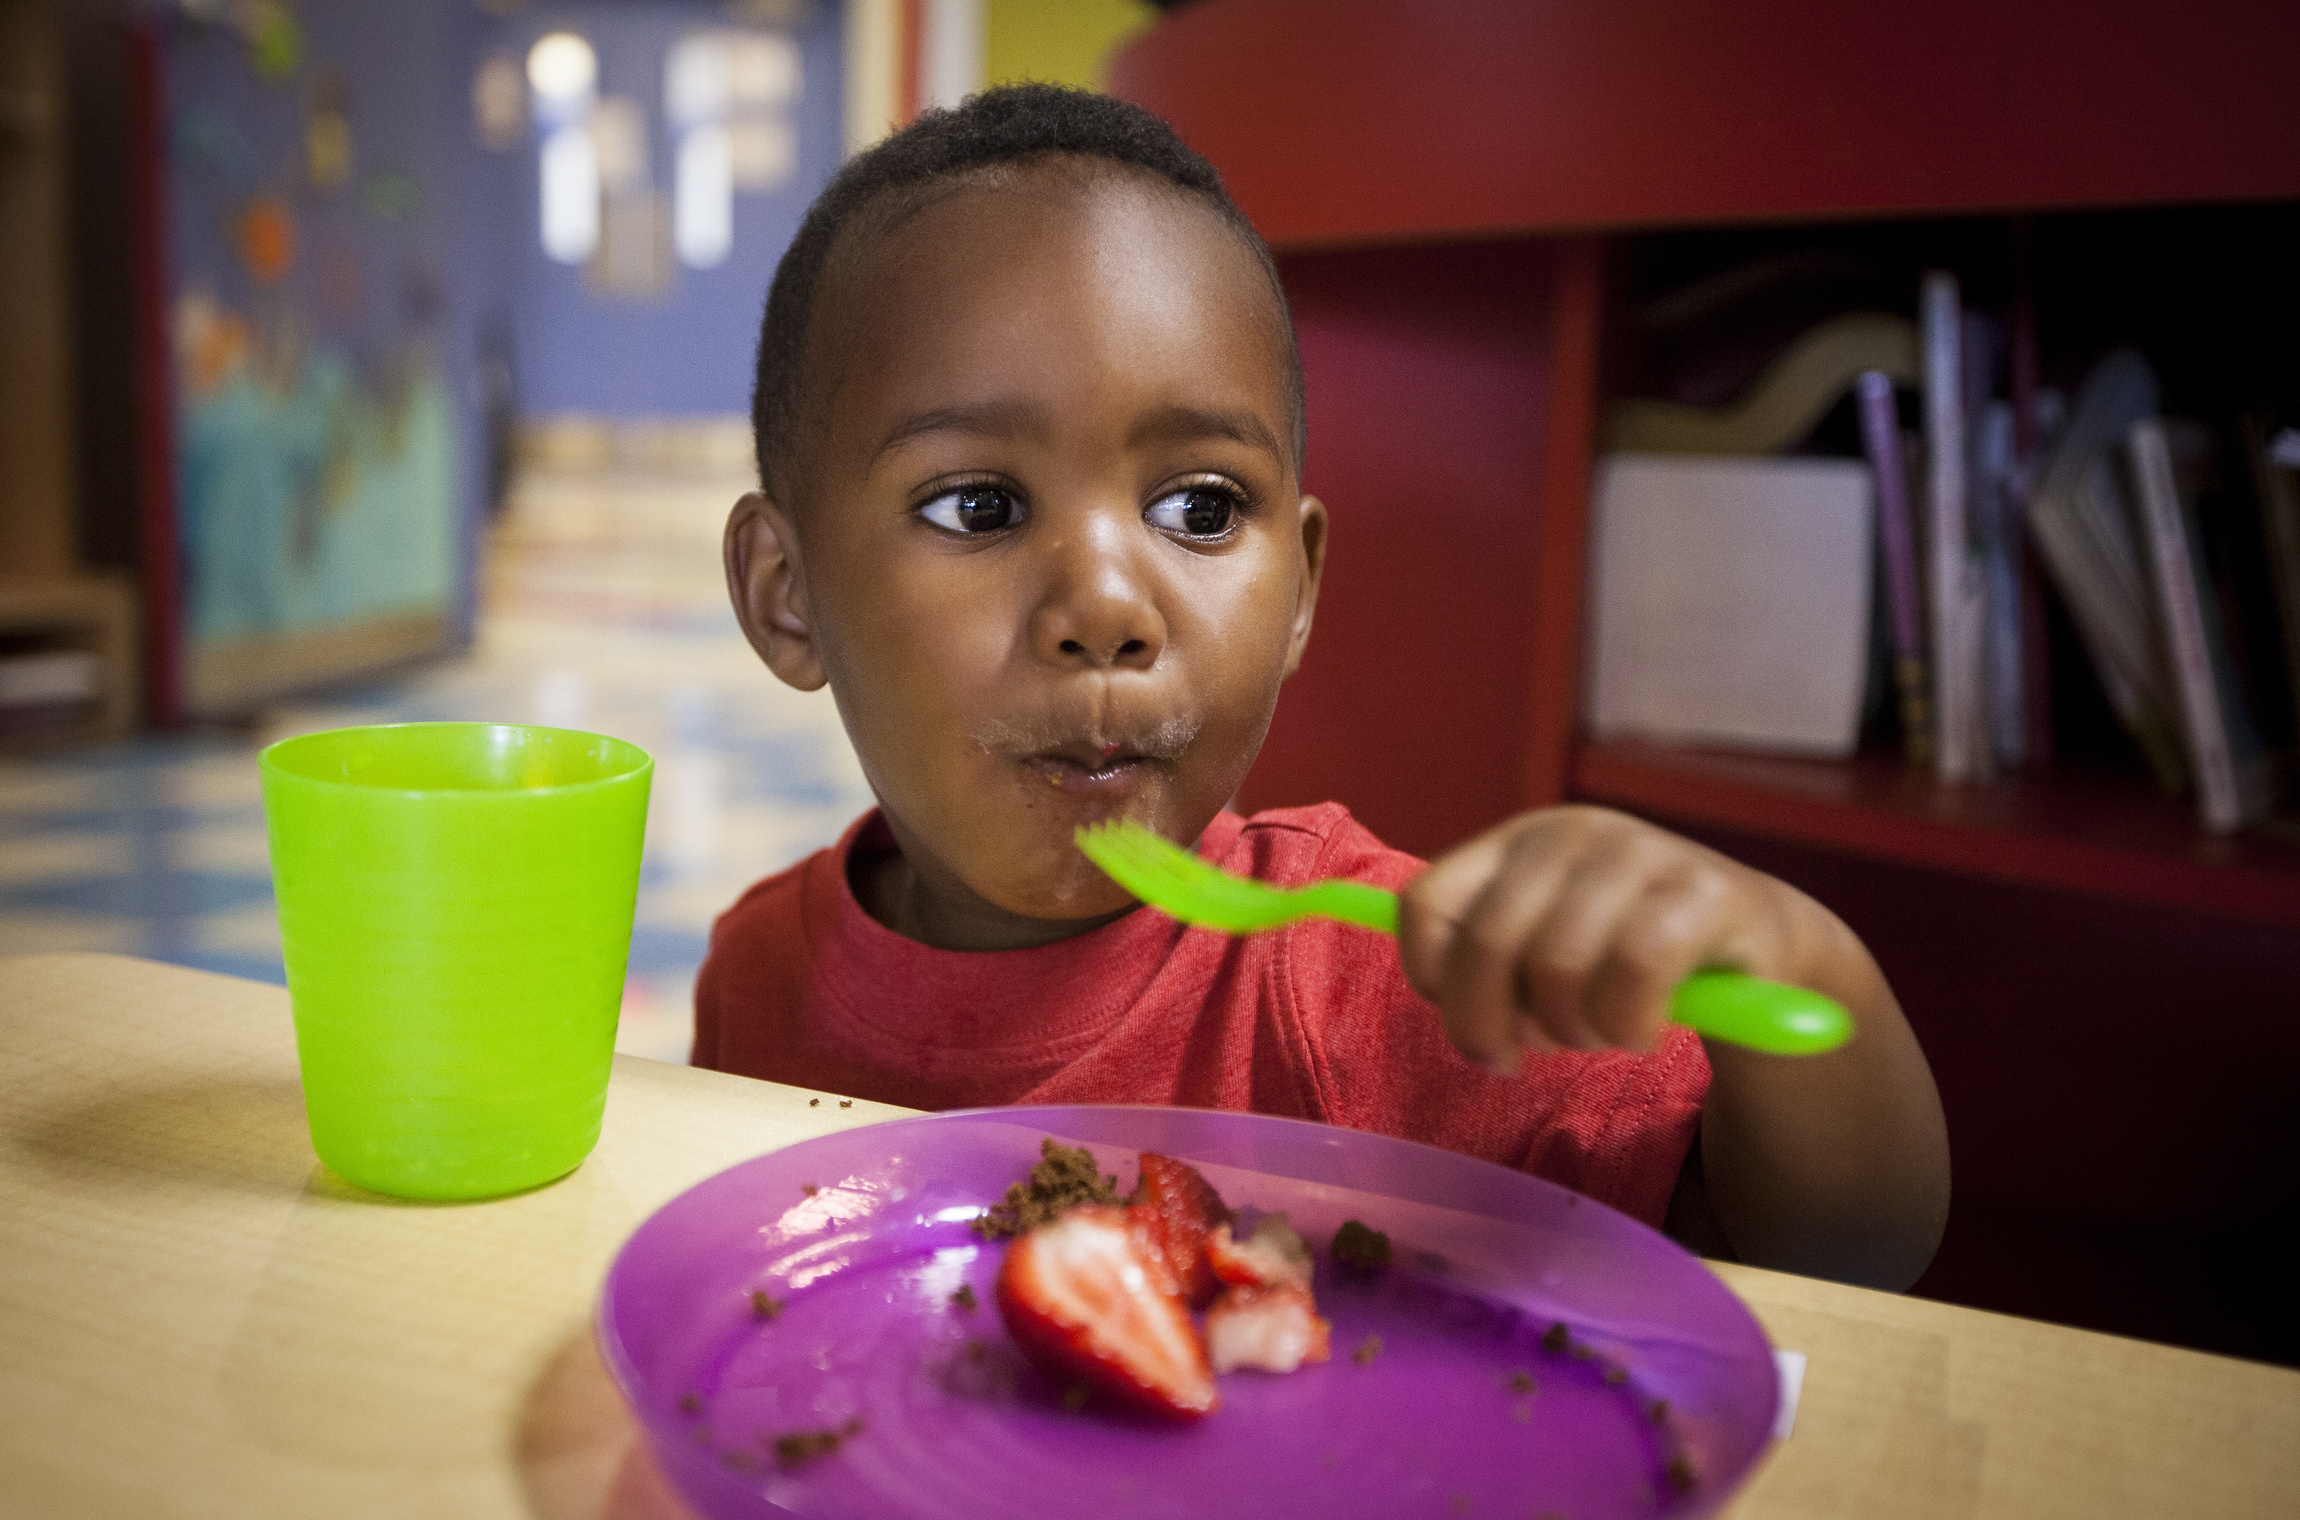 Kayden Grady, 2, takes a bite of his breakfast at a Baltimore Catholic Charities Head Start program in Edgewood, Md., June 13. While severe malnourishment is rare in the U.S., more than 16 million children live in households that are unable to access enough nutritious food for a healthy life, according to the U.S. Department of Agriculture. (CNS photo/Nancy Phelan Wiechec)